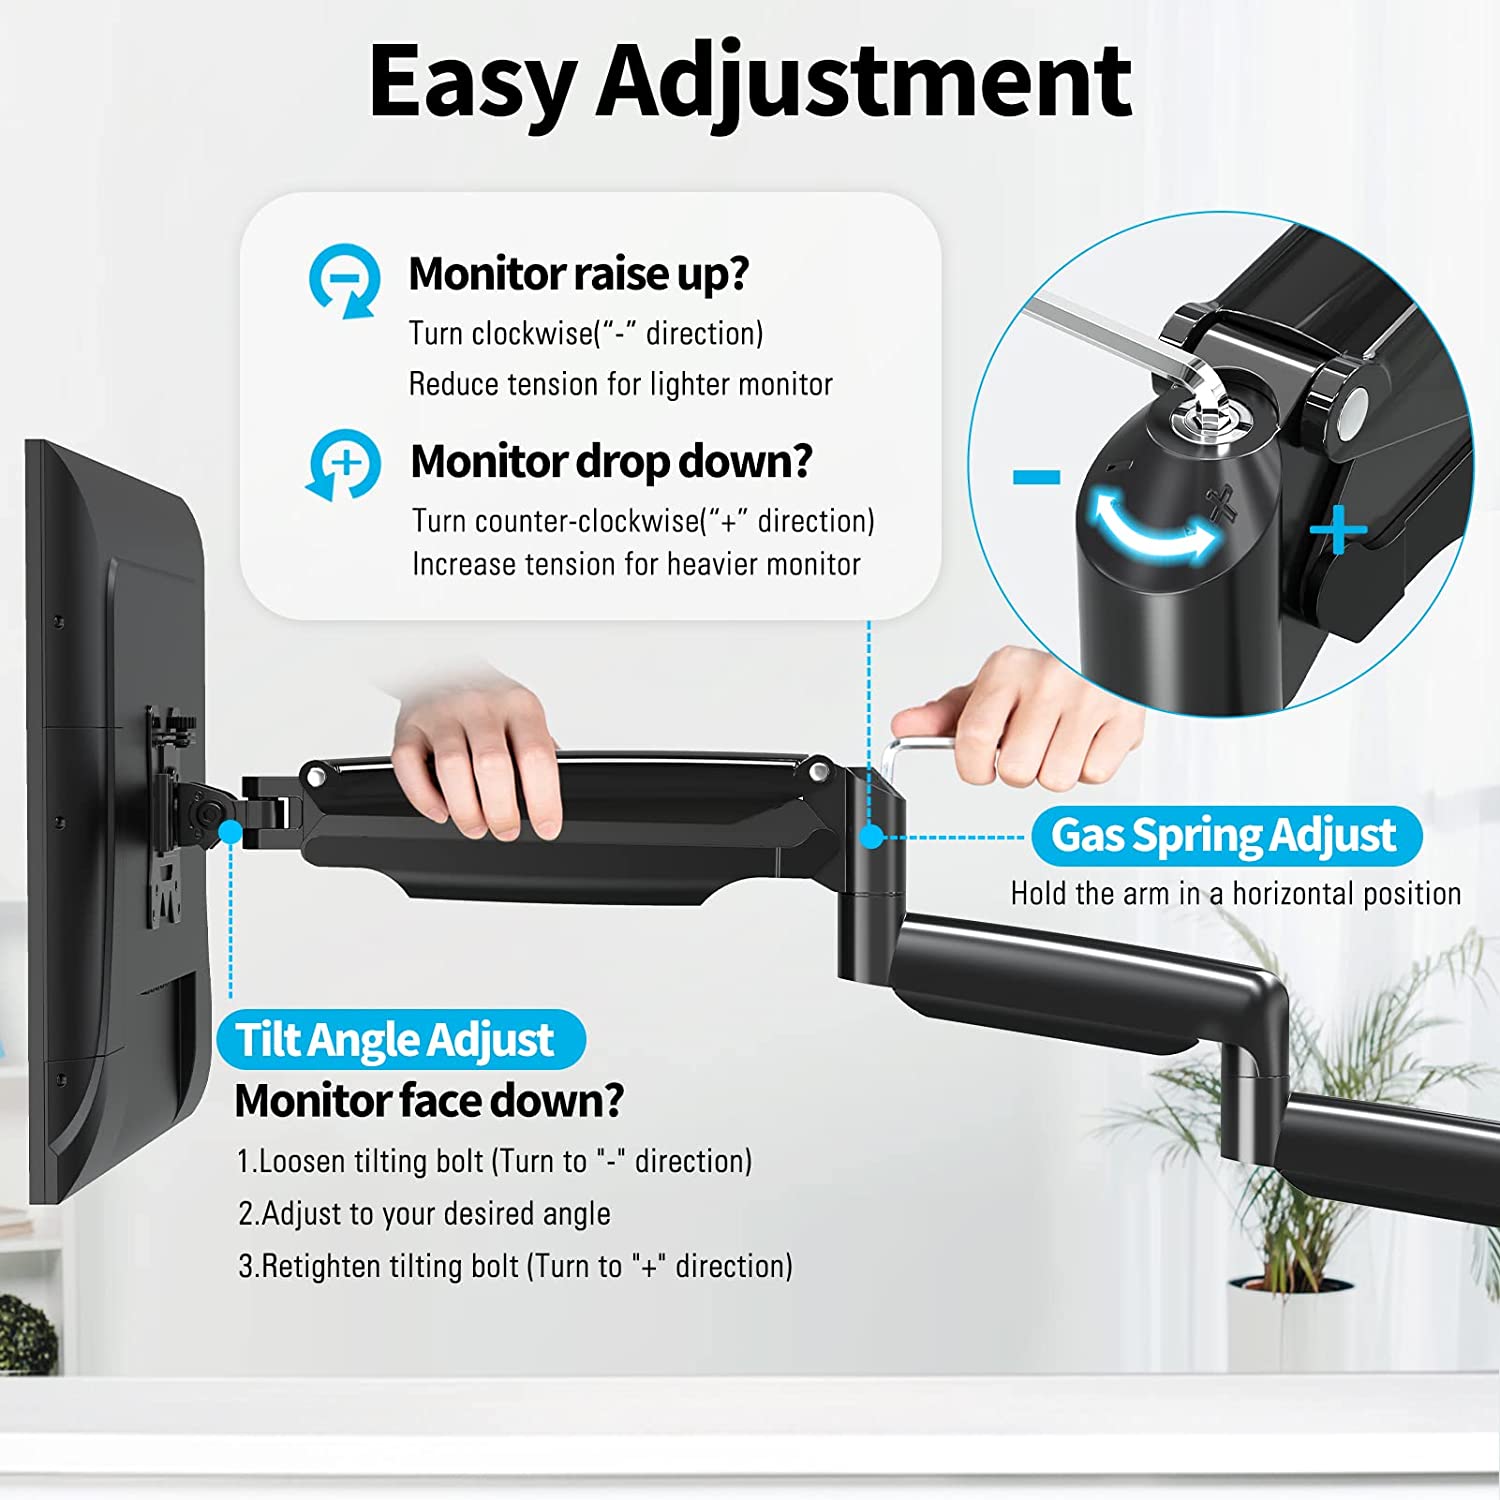 adjust tension according to the monitor's weight